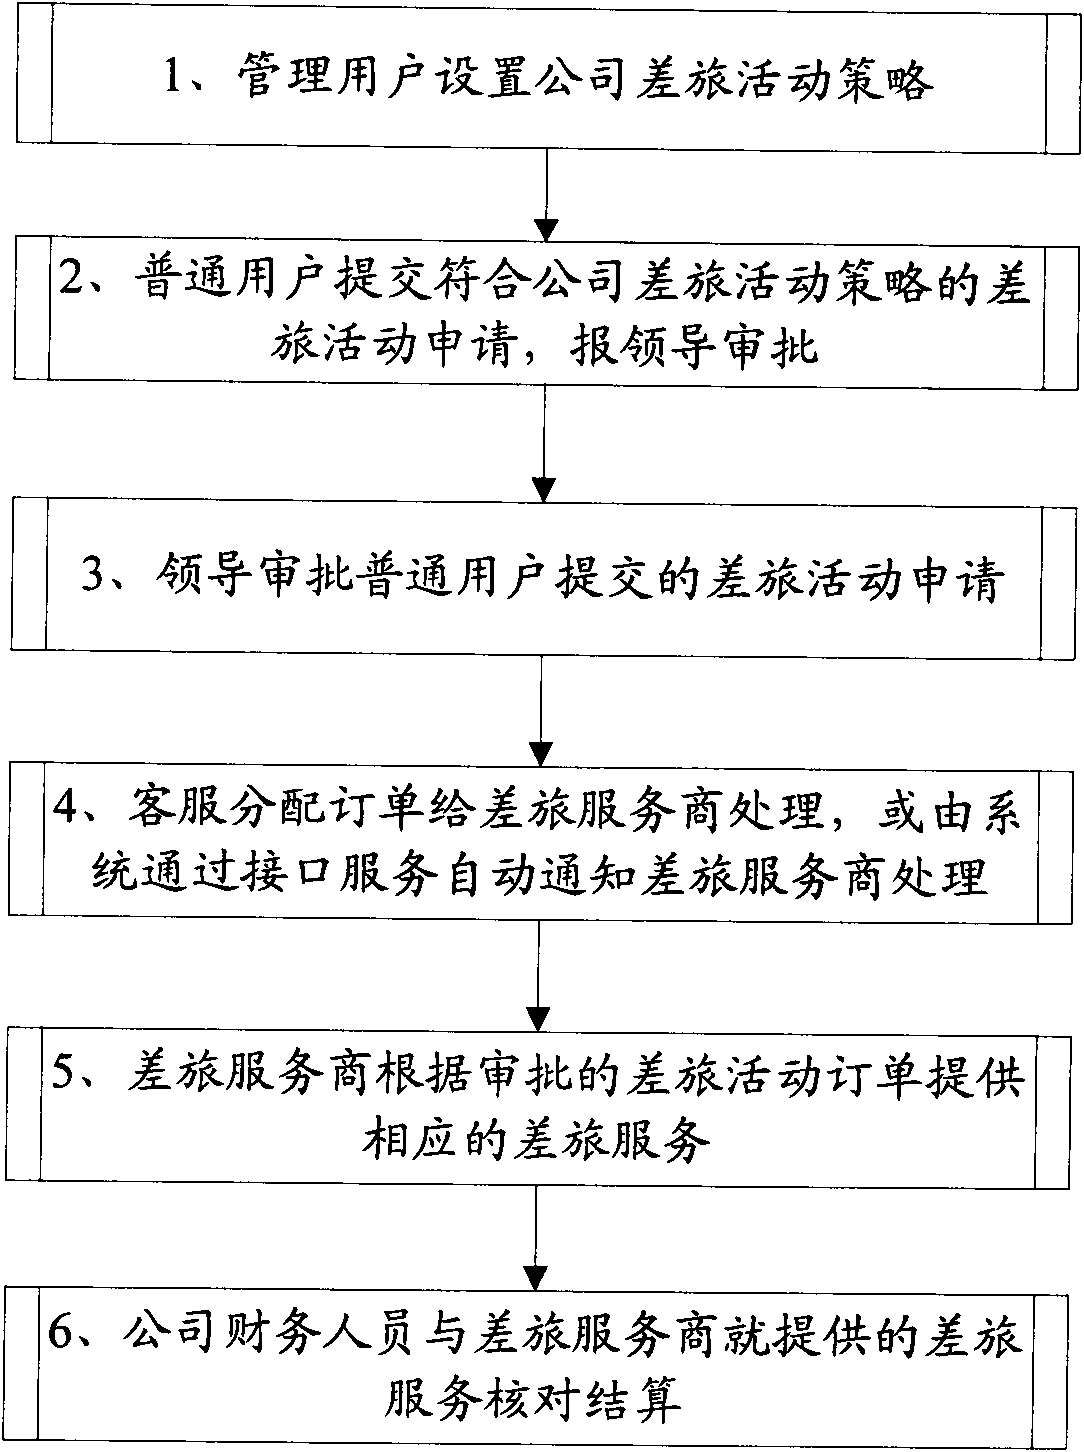 One-stop travel activity management method and system